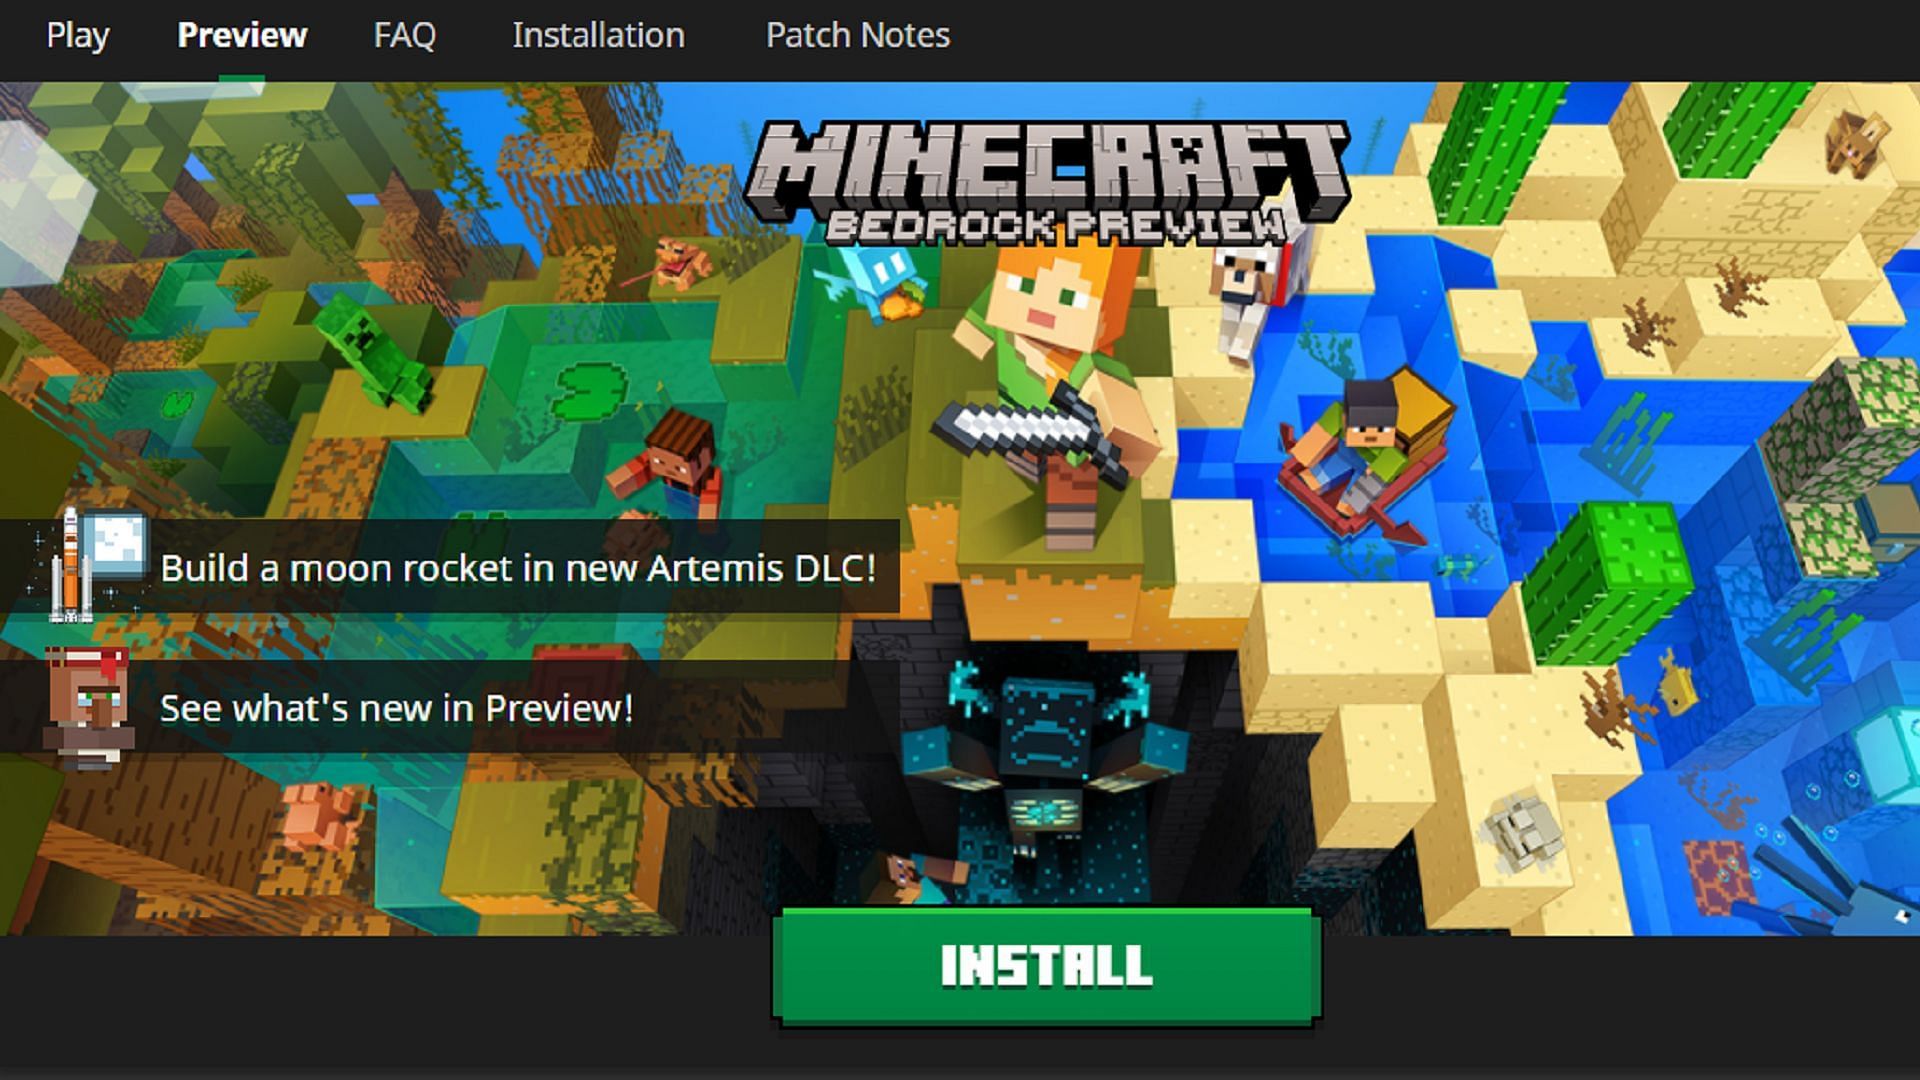 Windows 10 users can easily access Minecraft Preview with the official launcher (Image via Mojang)